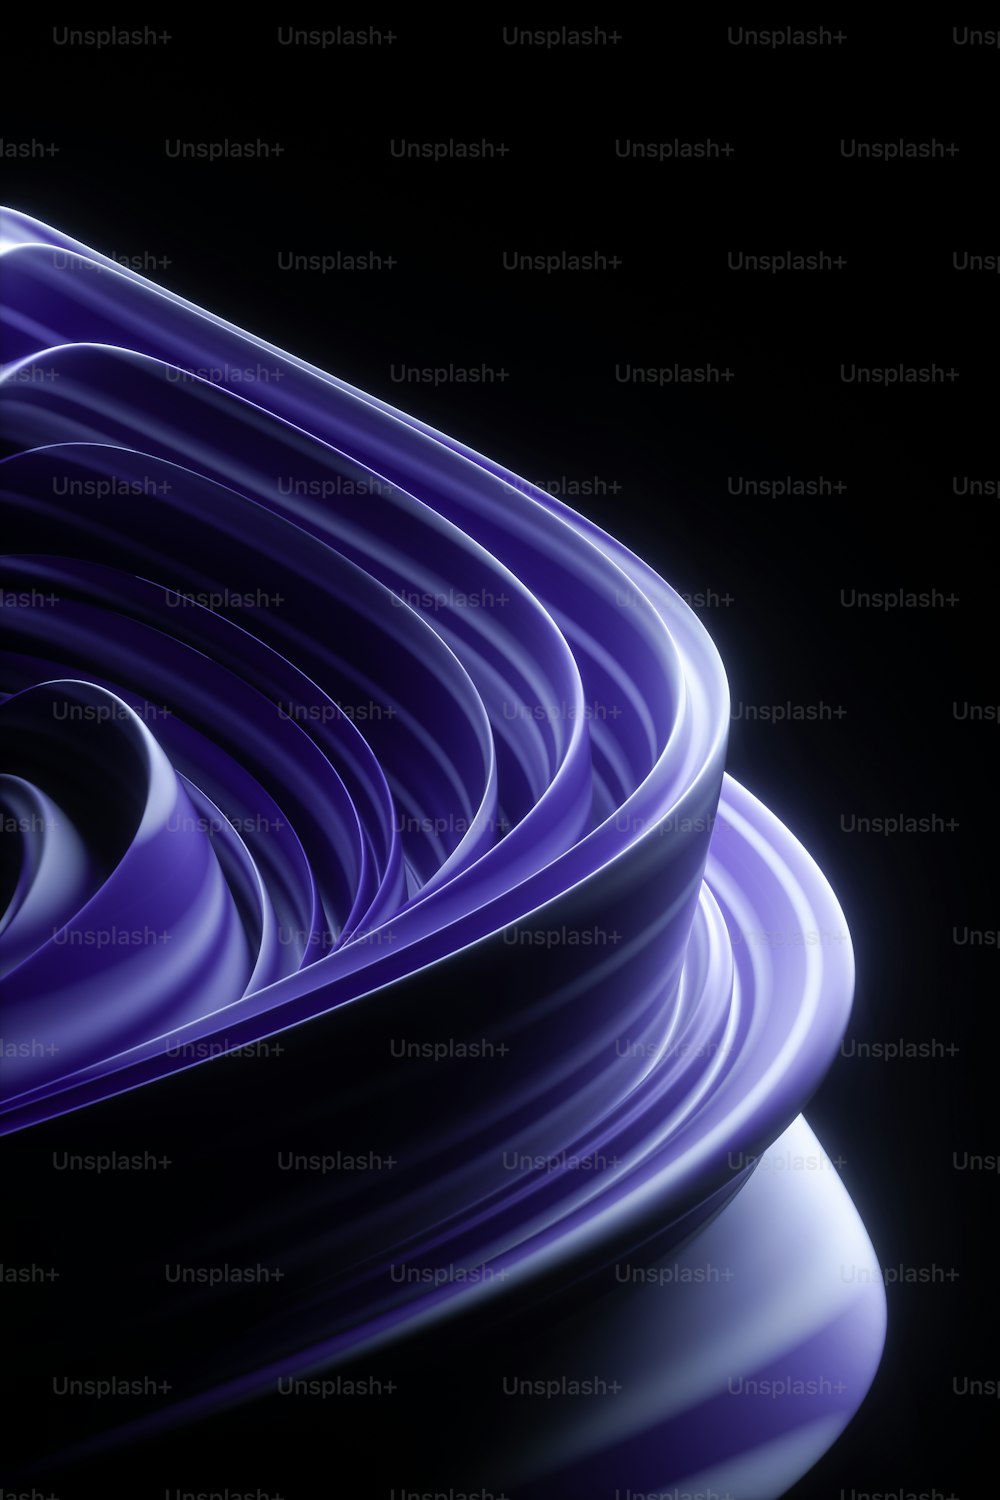 a close up of a purple object on a black background